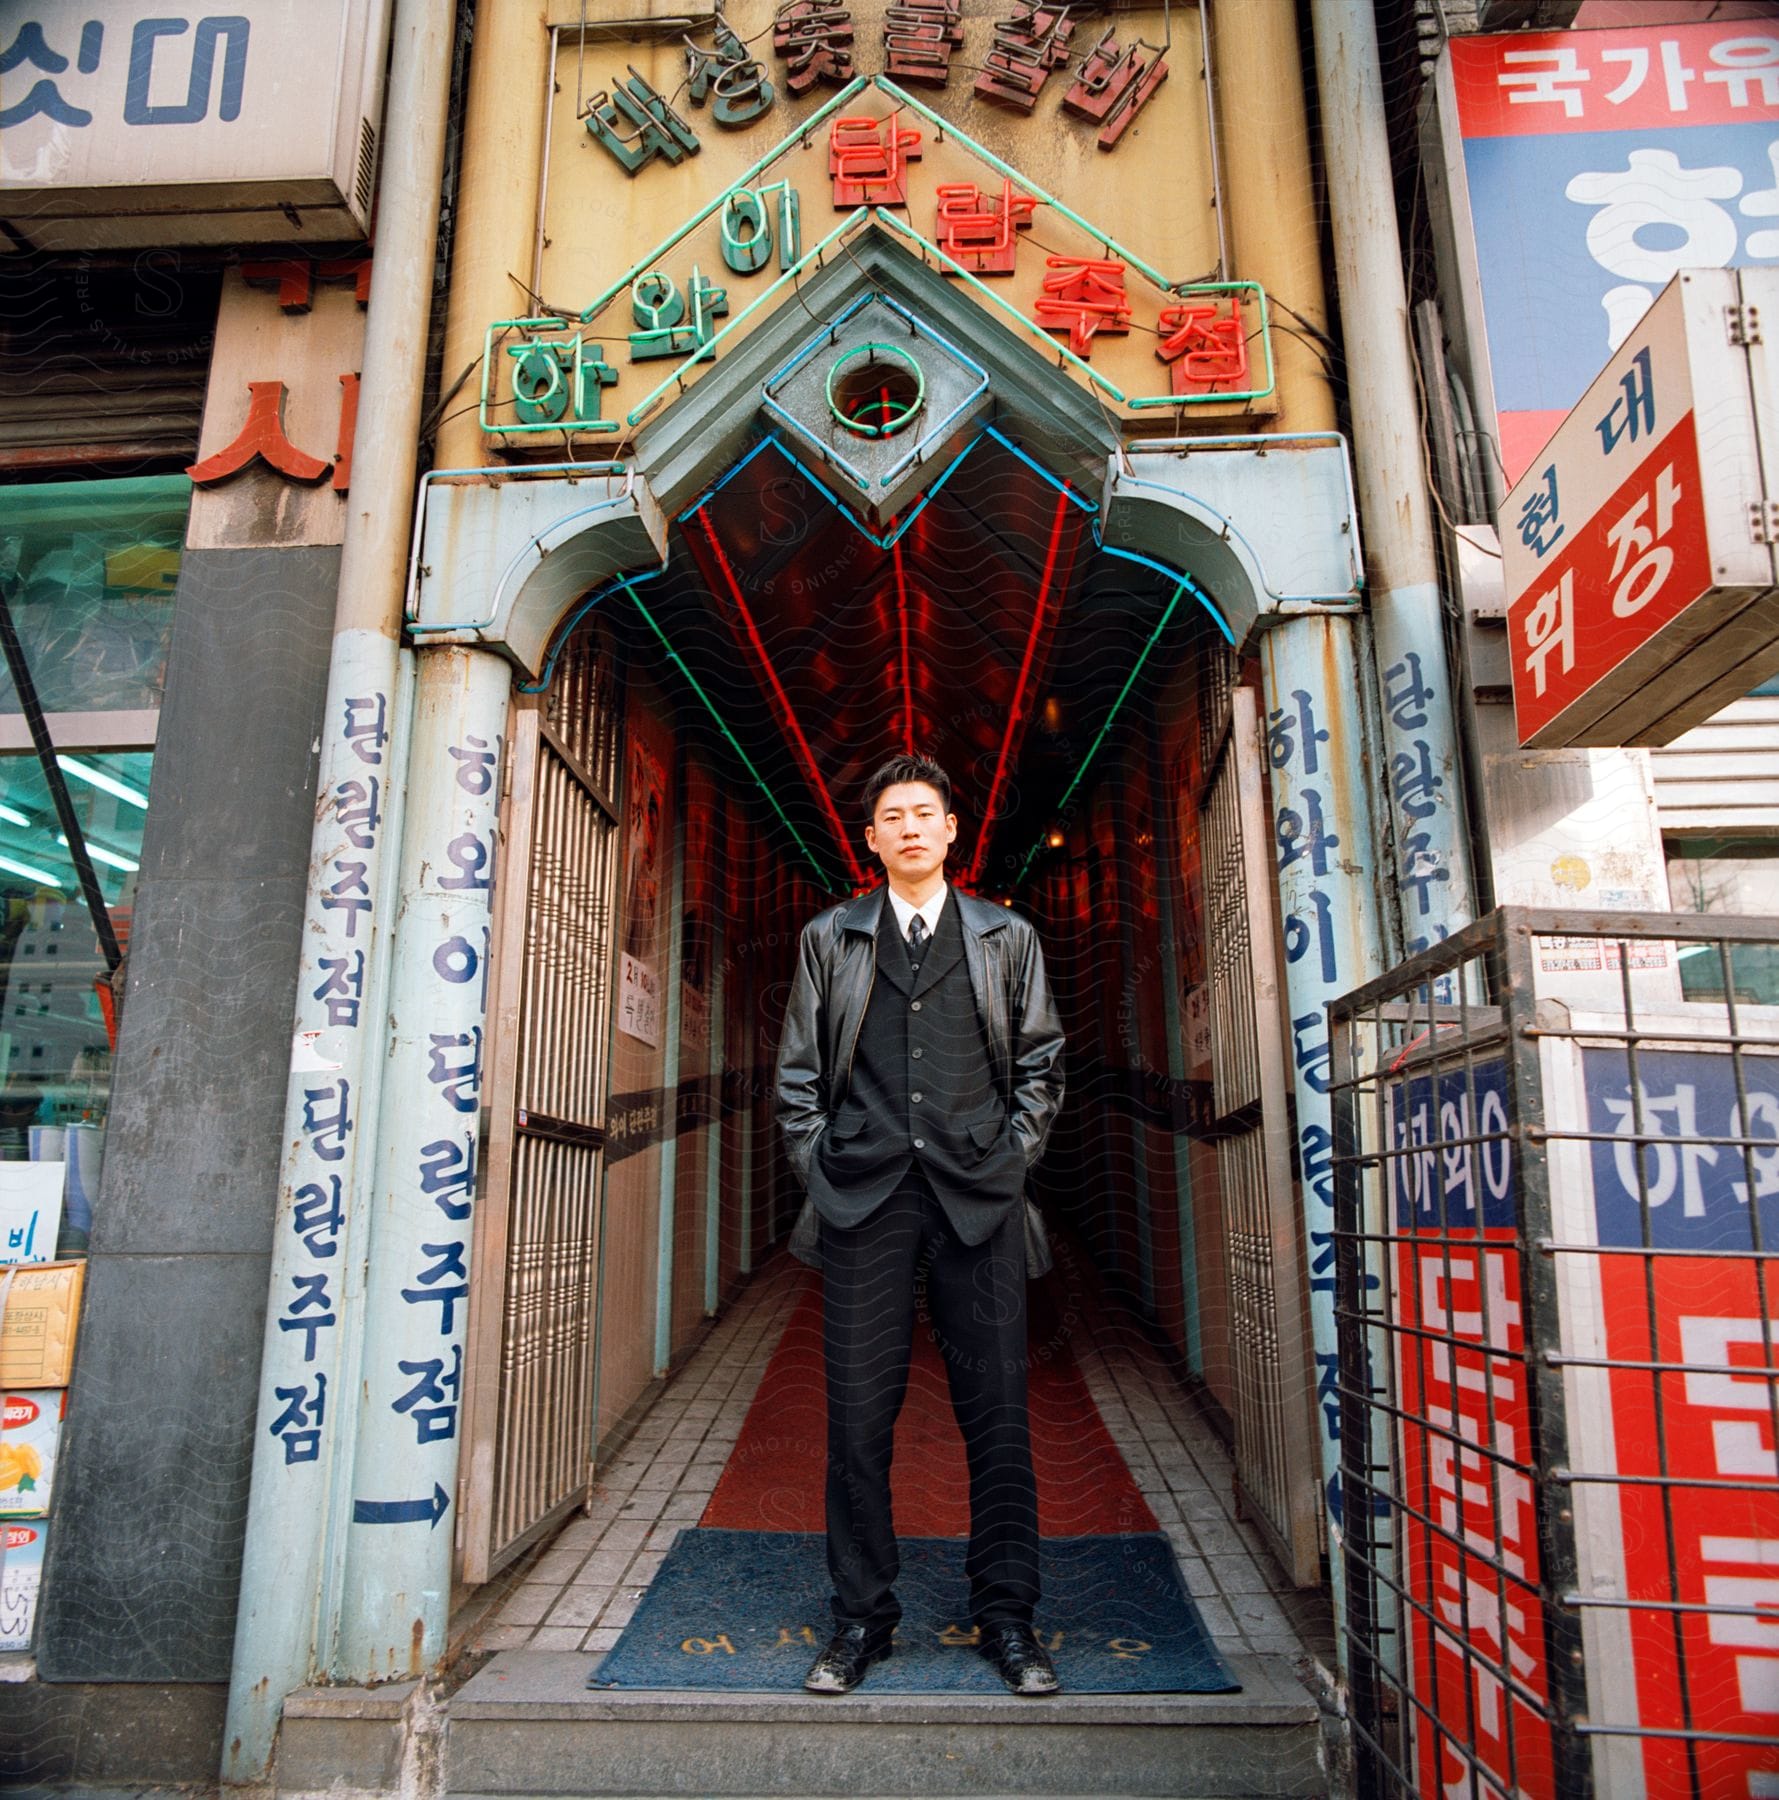 A man in a suit stands at the entrance of a building exuding confidence and pride